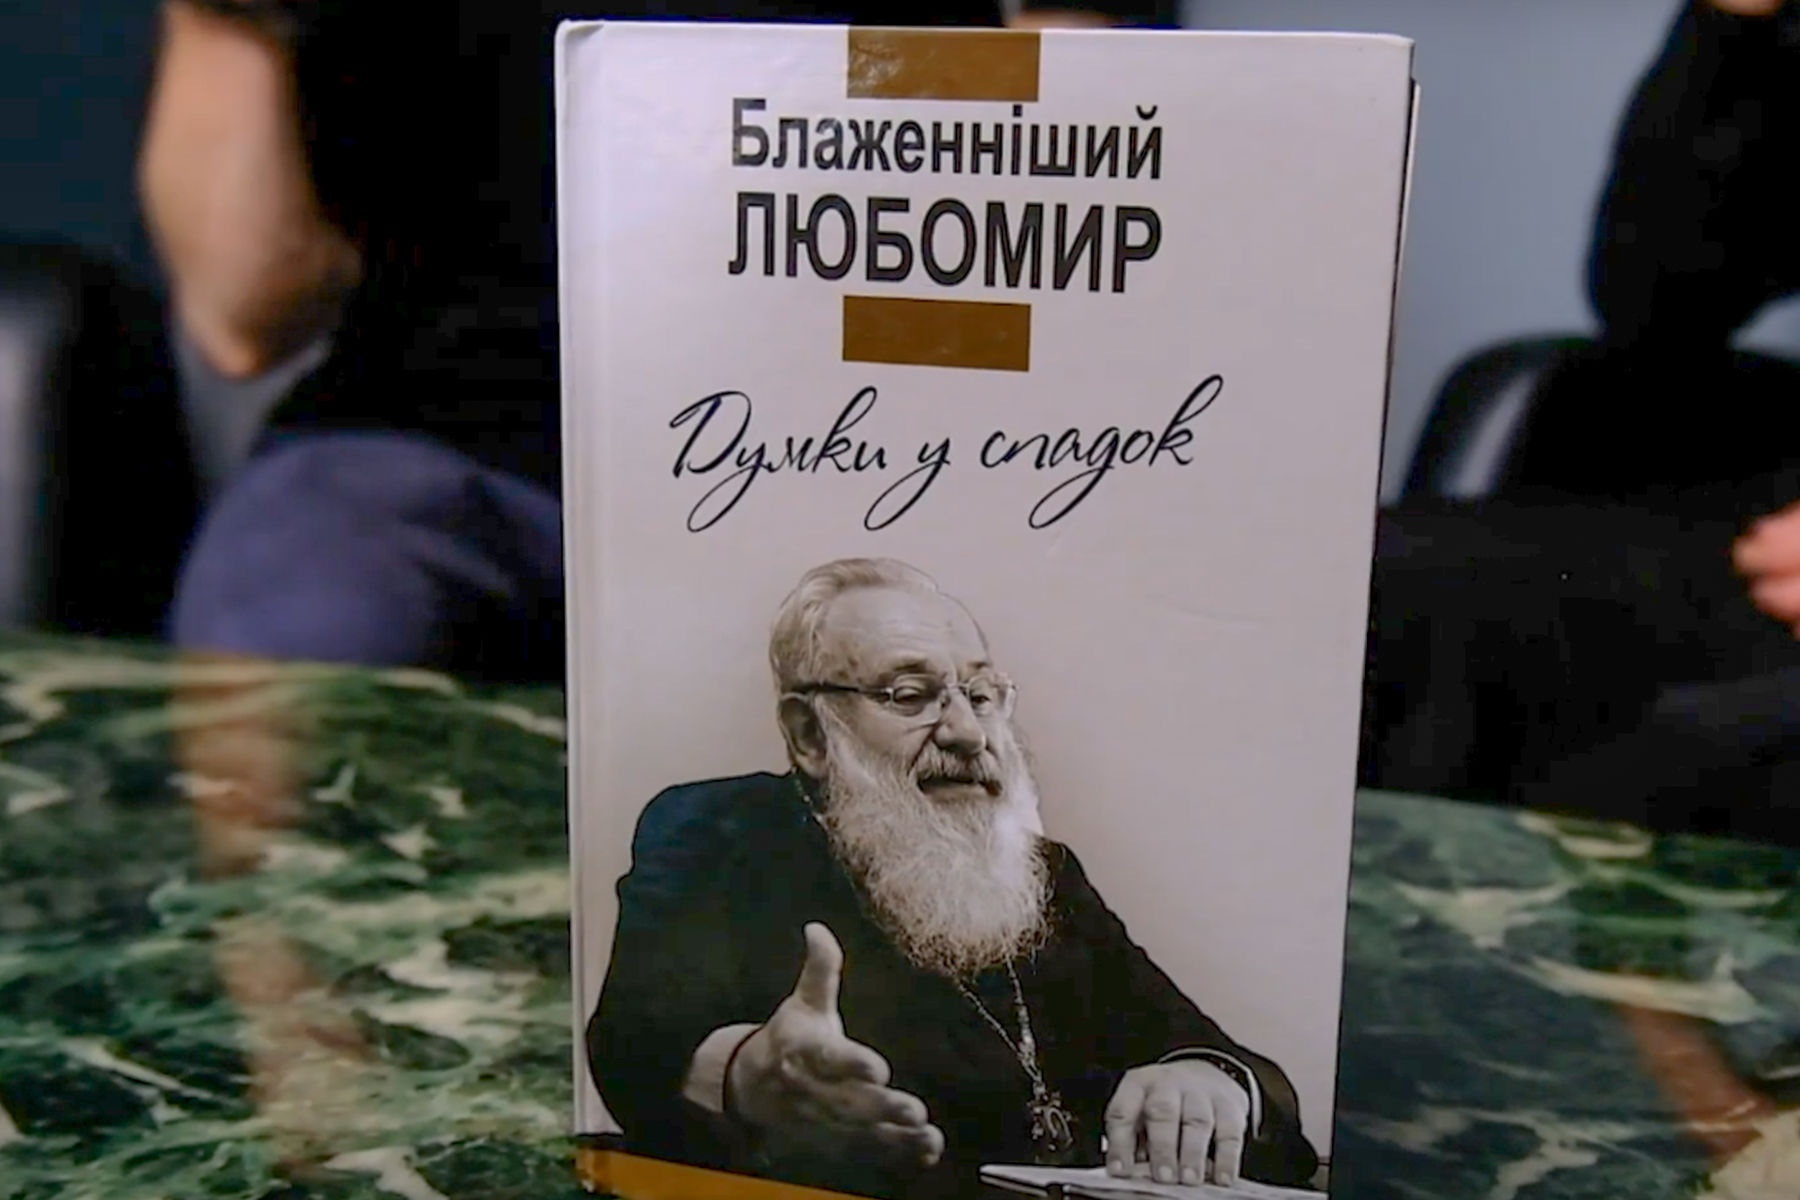 Audiobook of His Beatitude Lubomyr Husar’s Reflections Published in Lviv